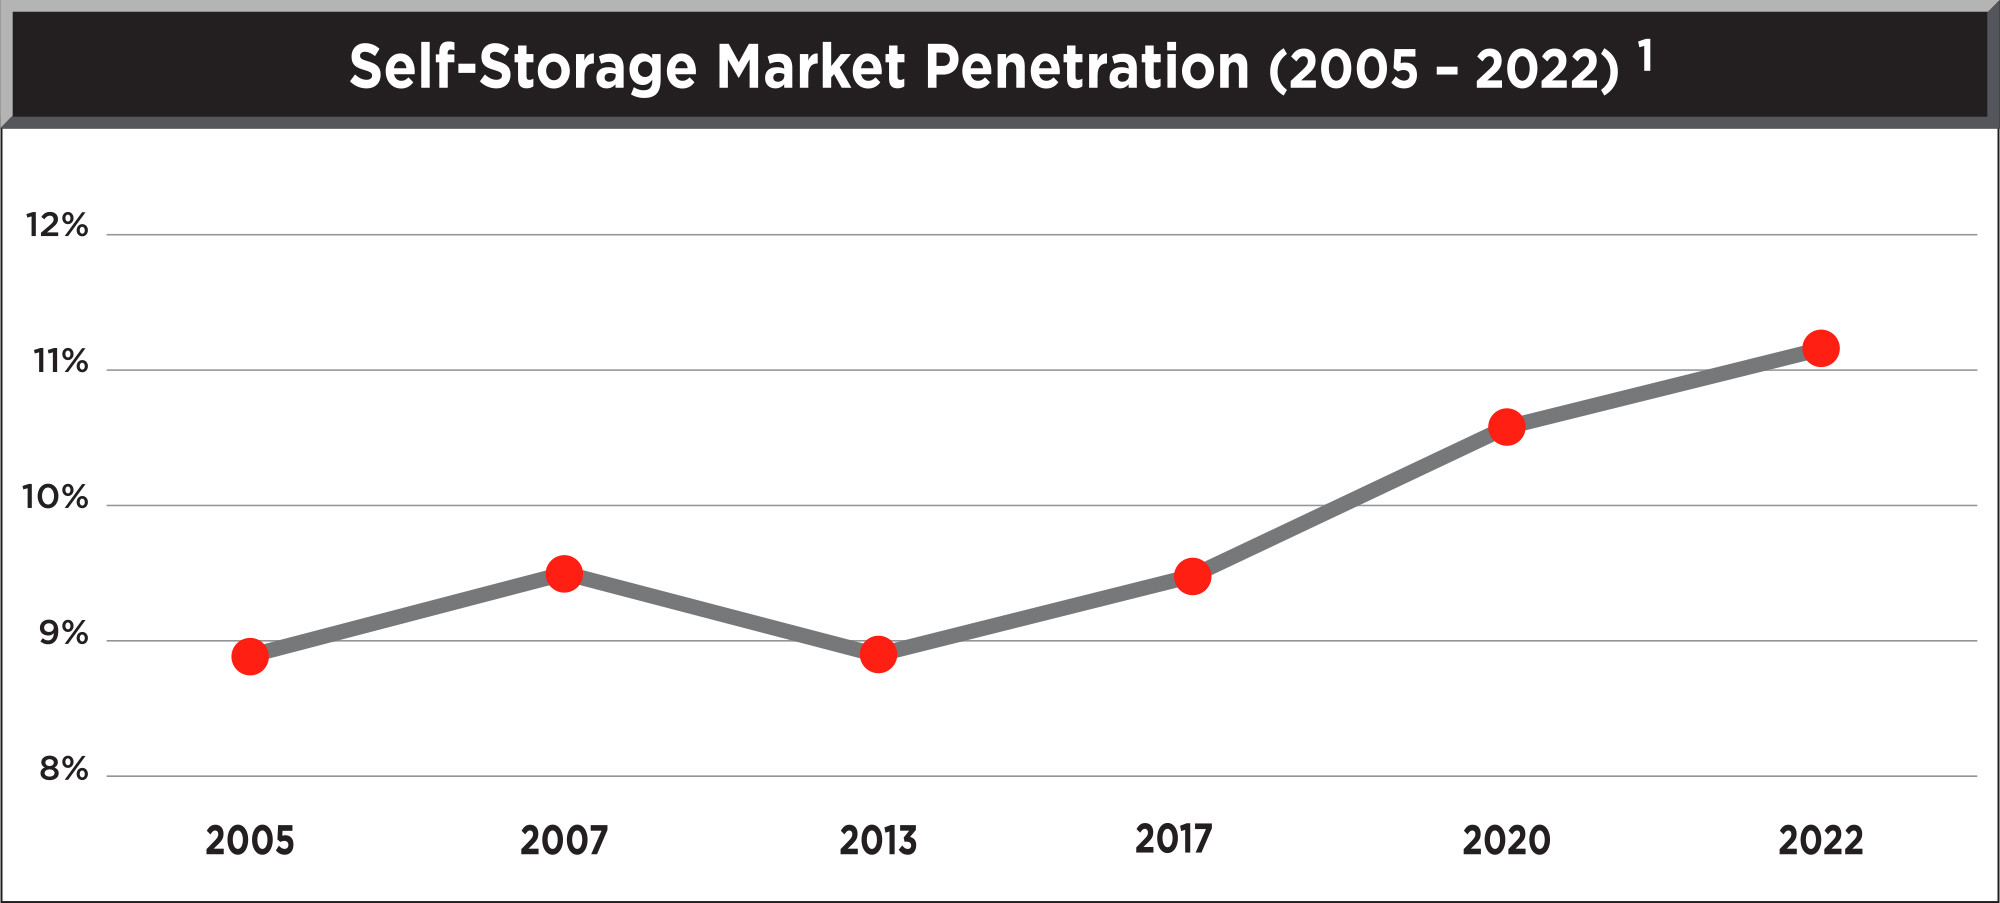 graph depicting Self-Storage Market Penetration from 2005-2022